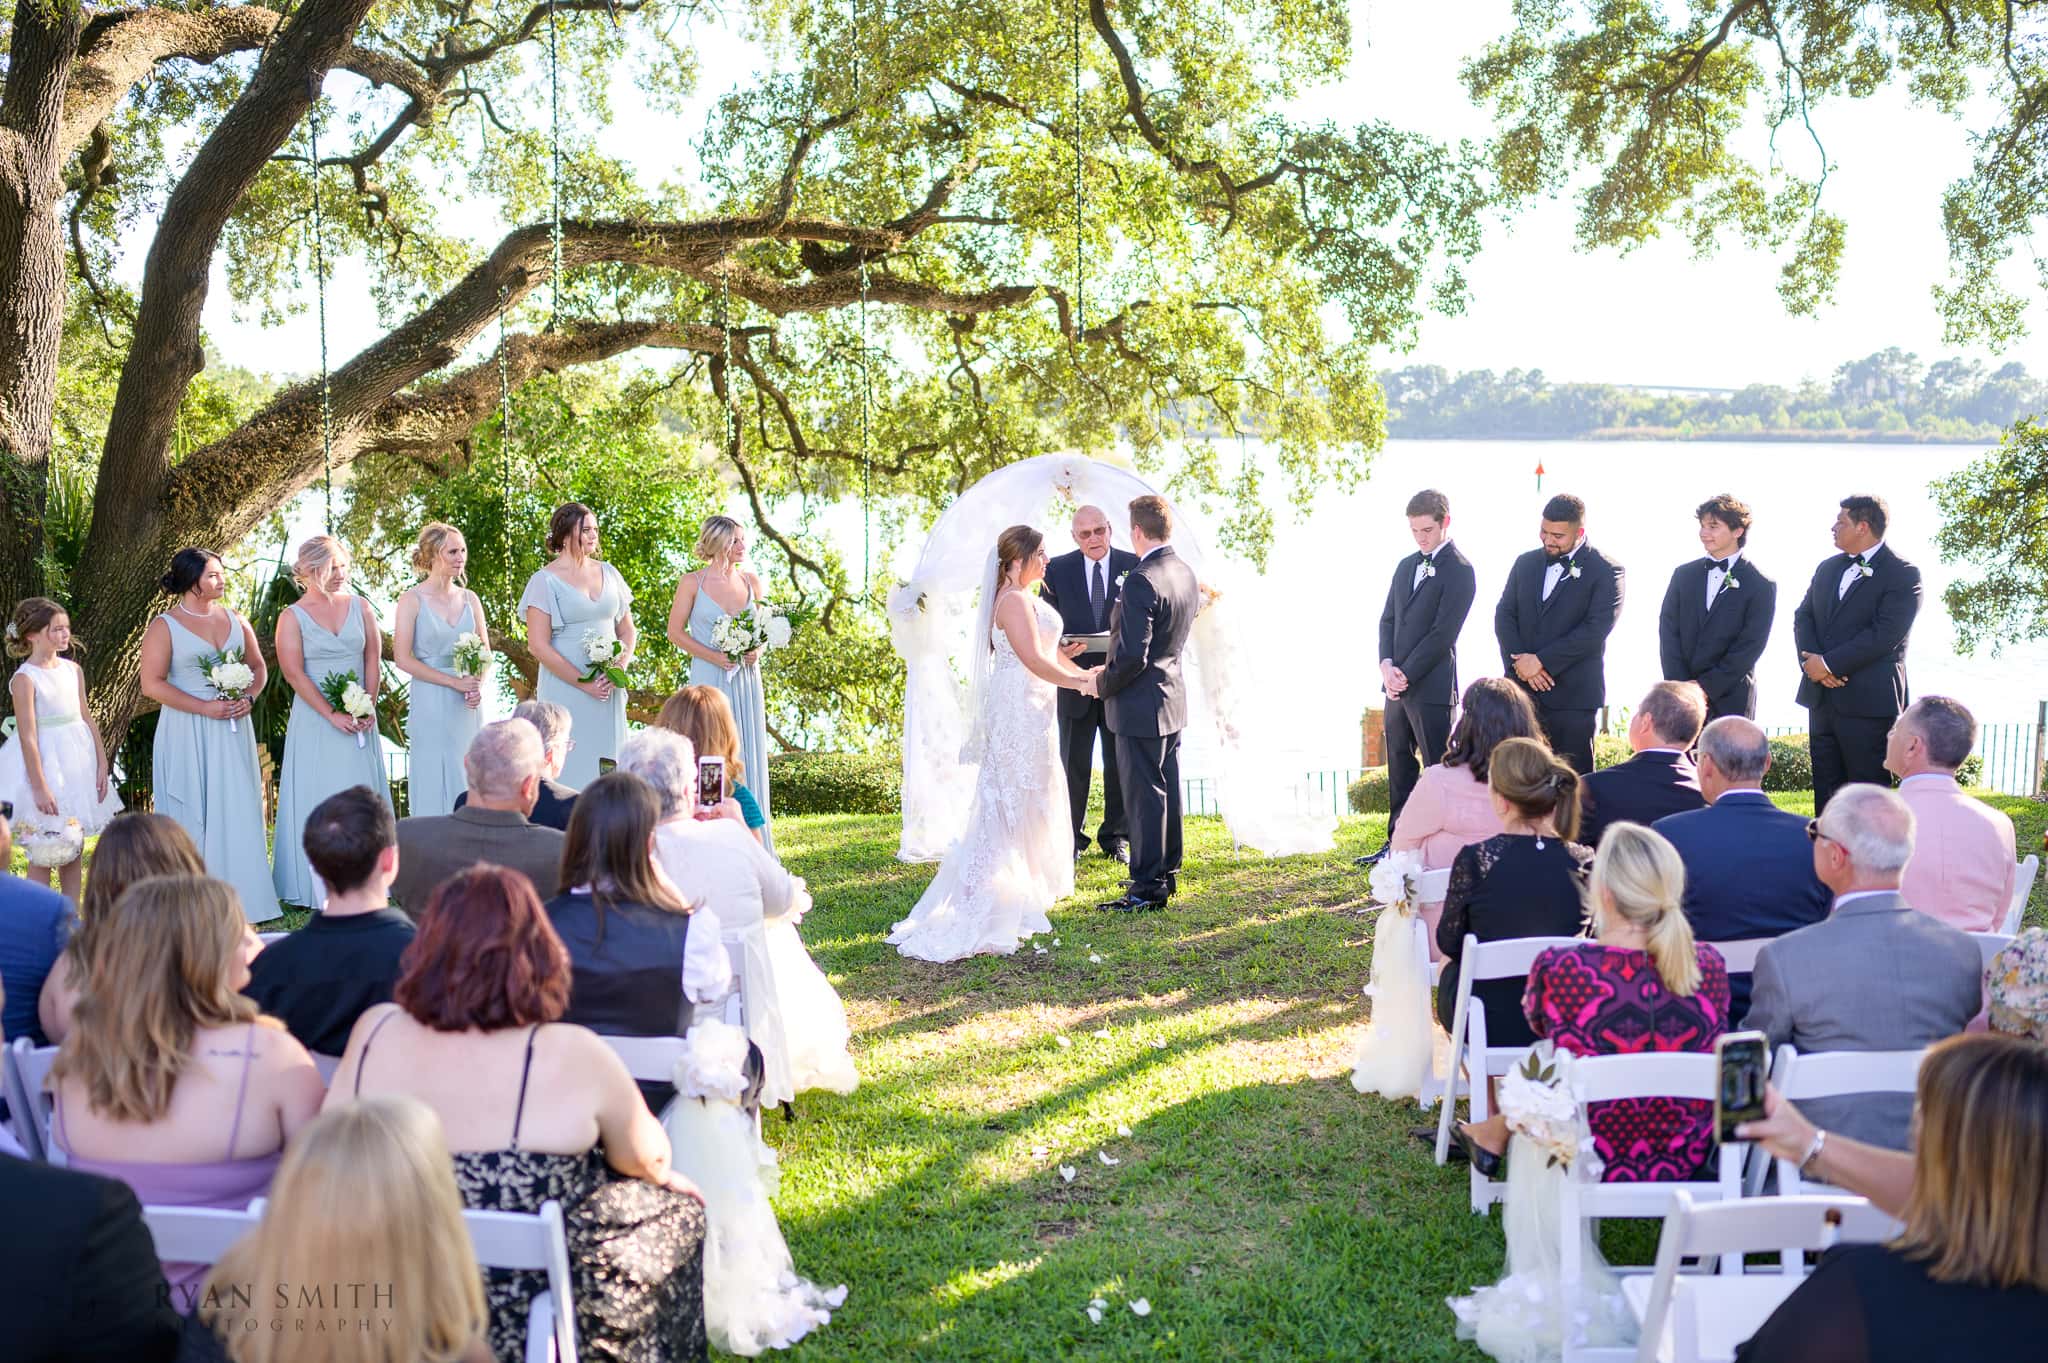 Beautiful ceremony on the Sampit river behind the house - Kaminski House Museum